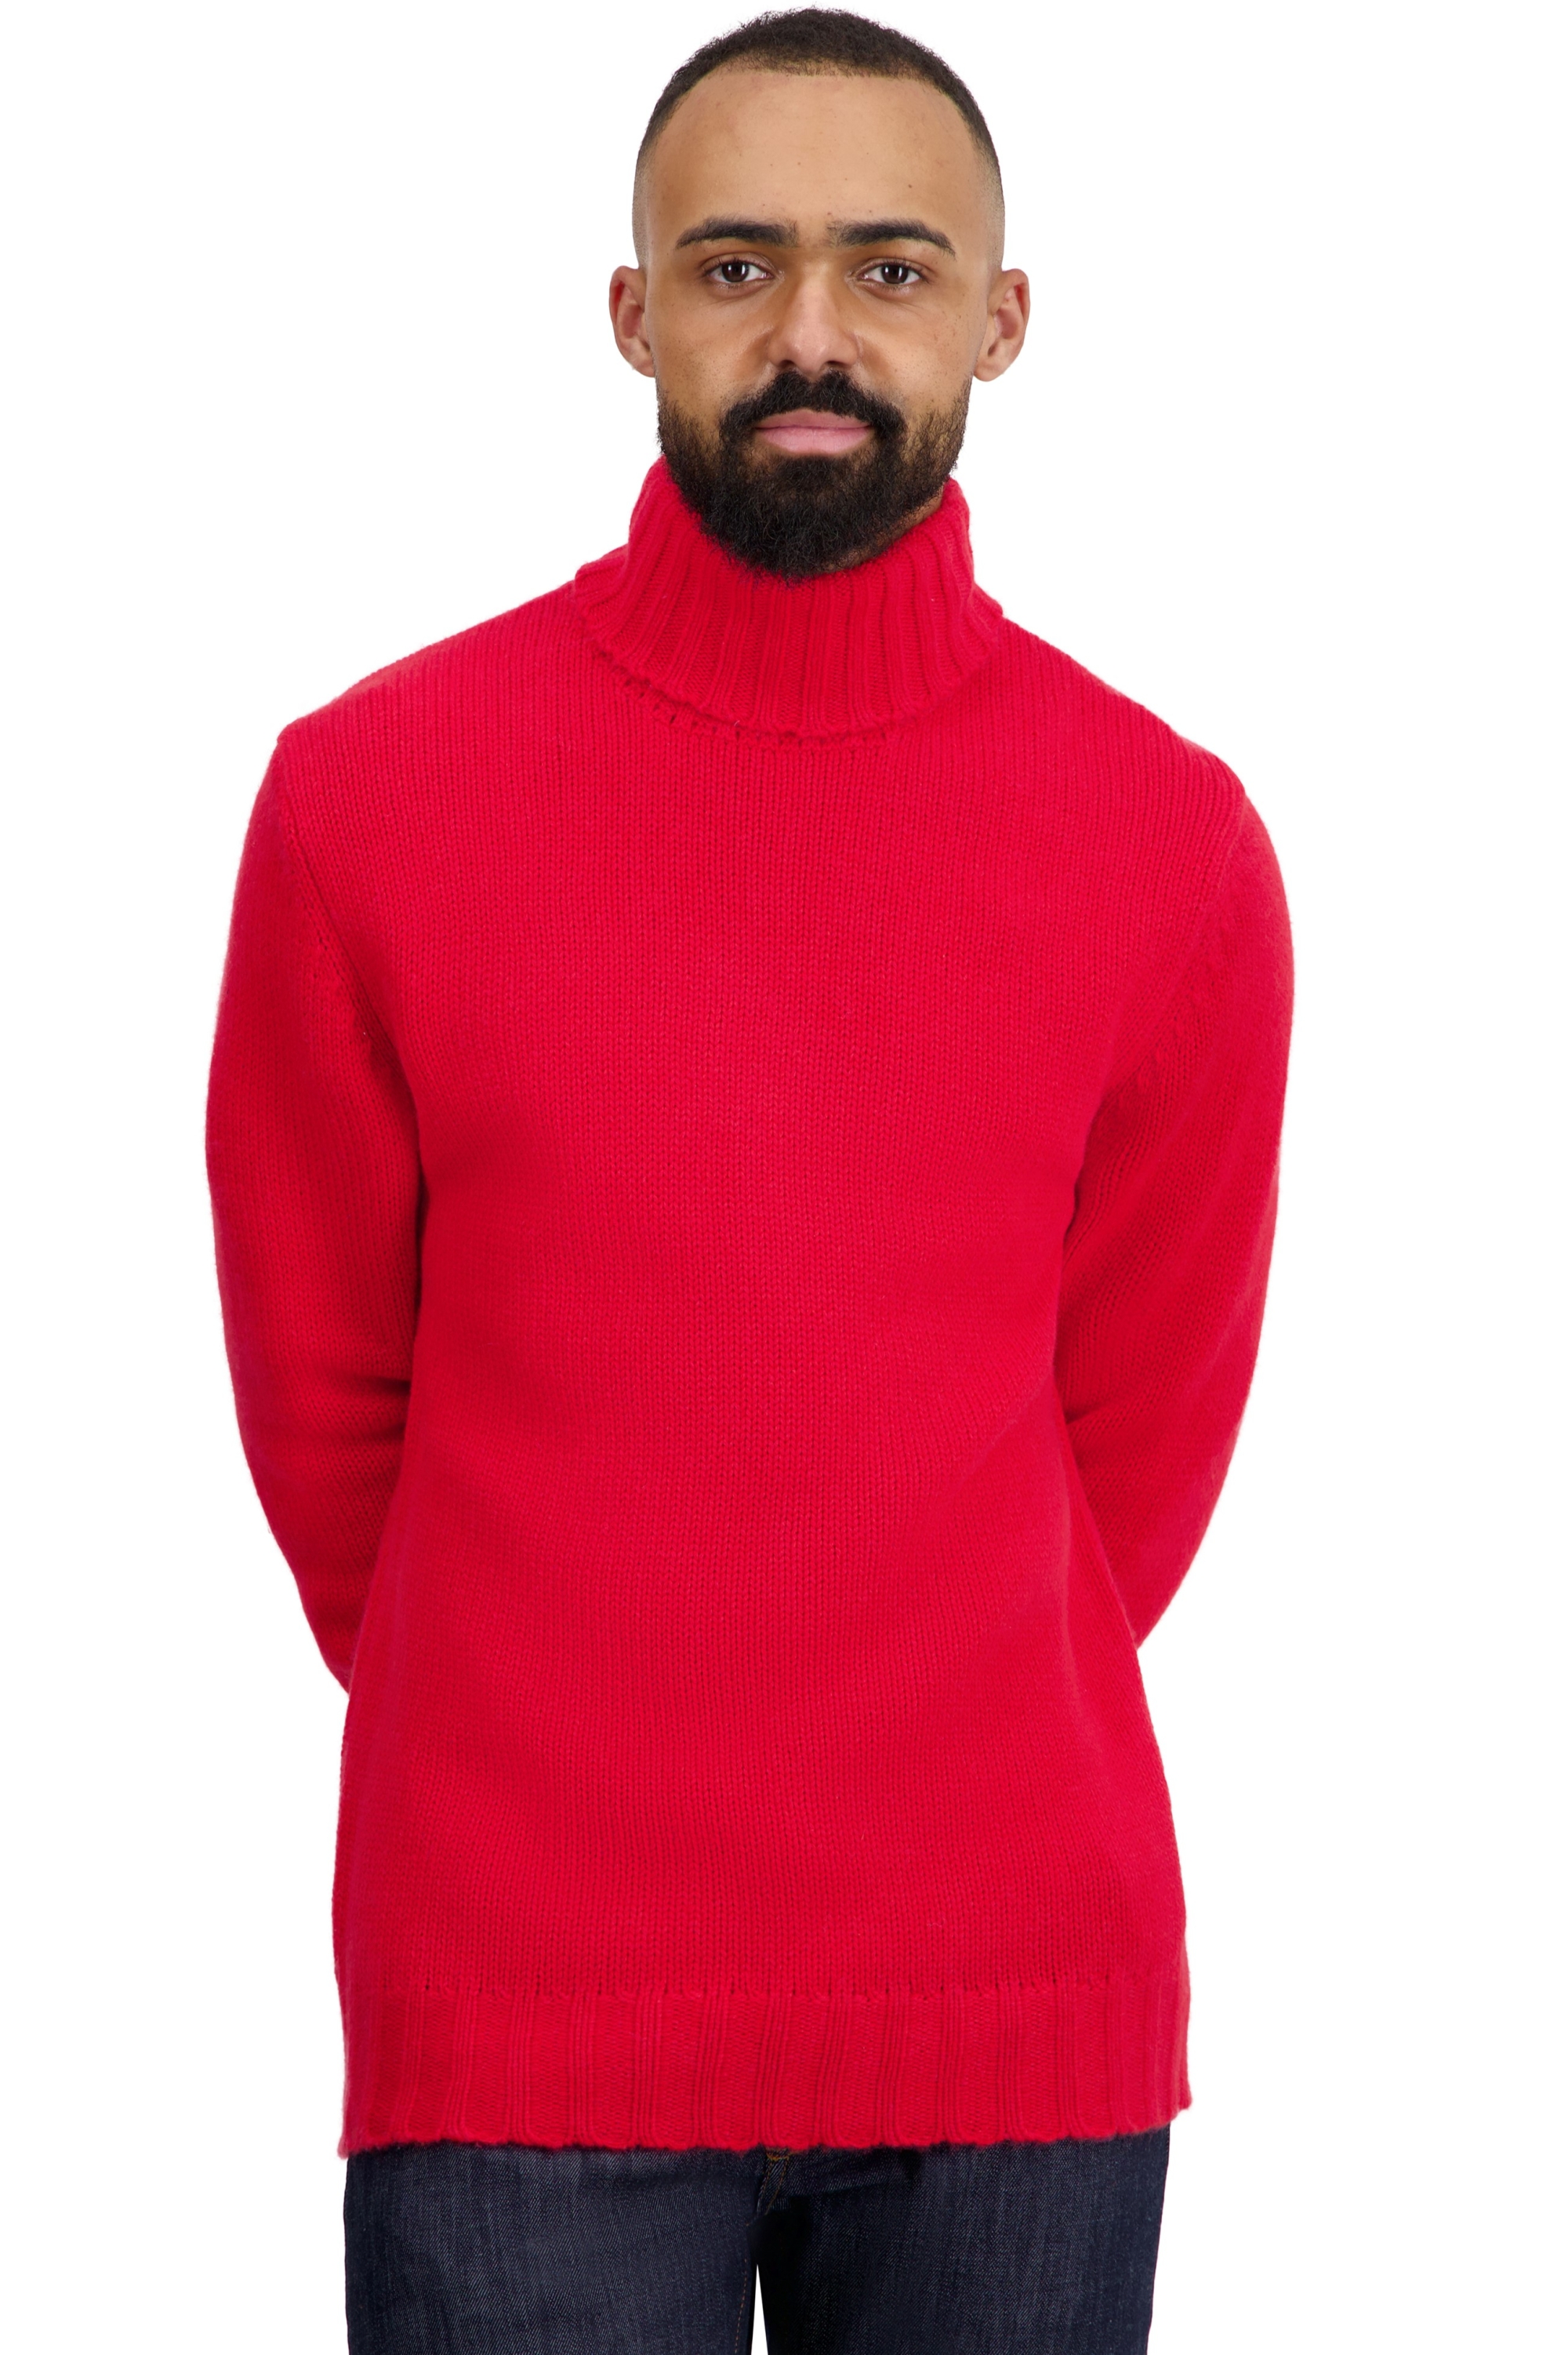 Cachemire pull homme col roule achille rouge 3xl